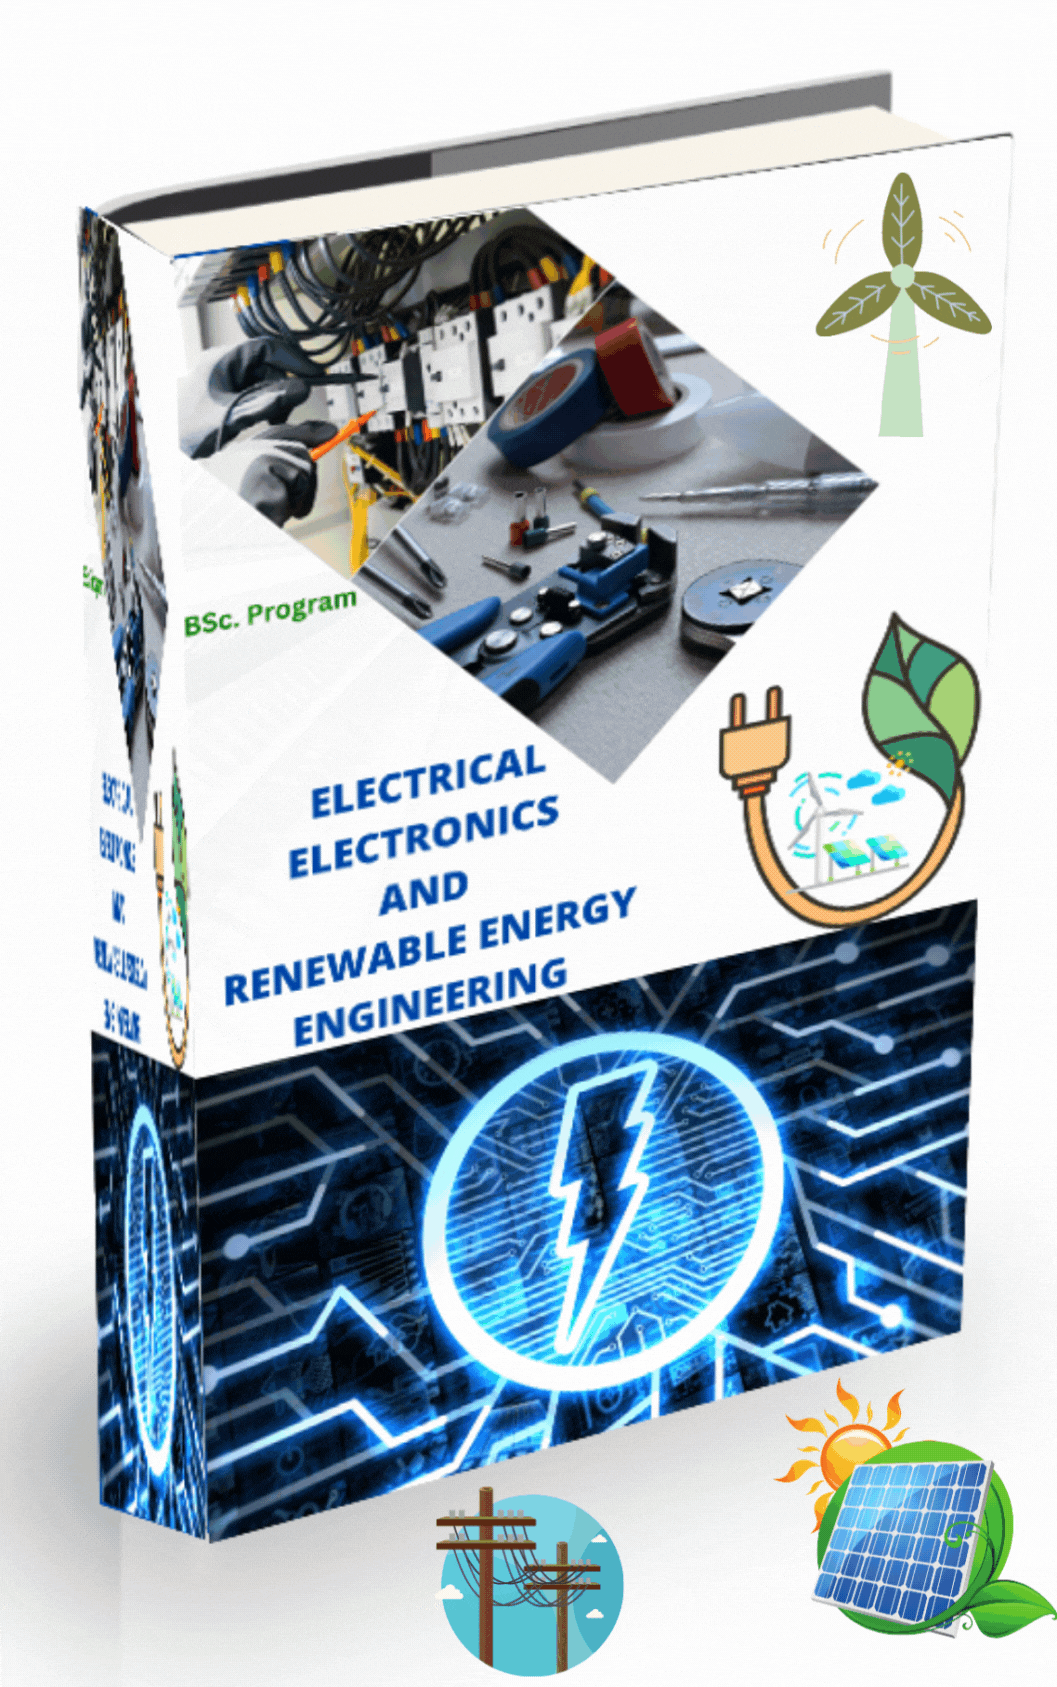 BACHELOR OF SCIENCE (BSc.) ELECTRICAL ELECTRONICS AND RENEWABLE ENERGY ENGINEERING